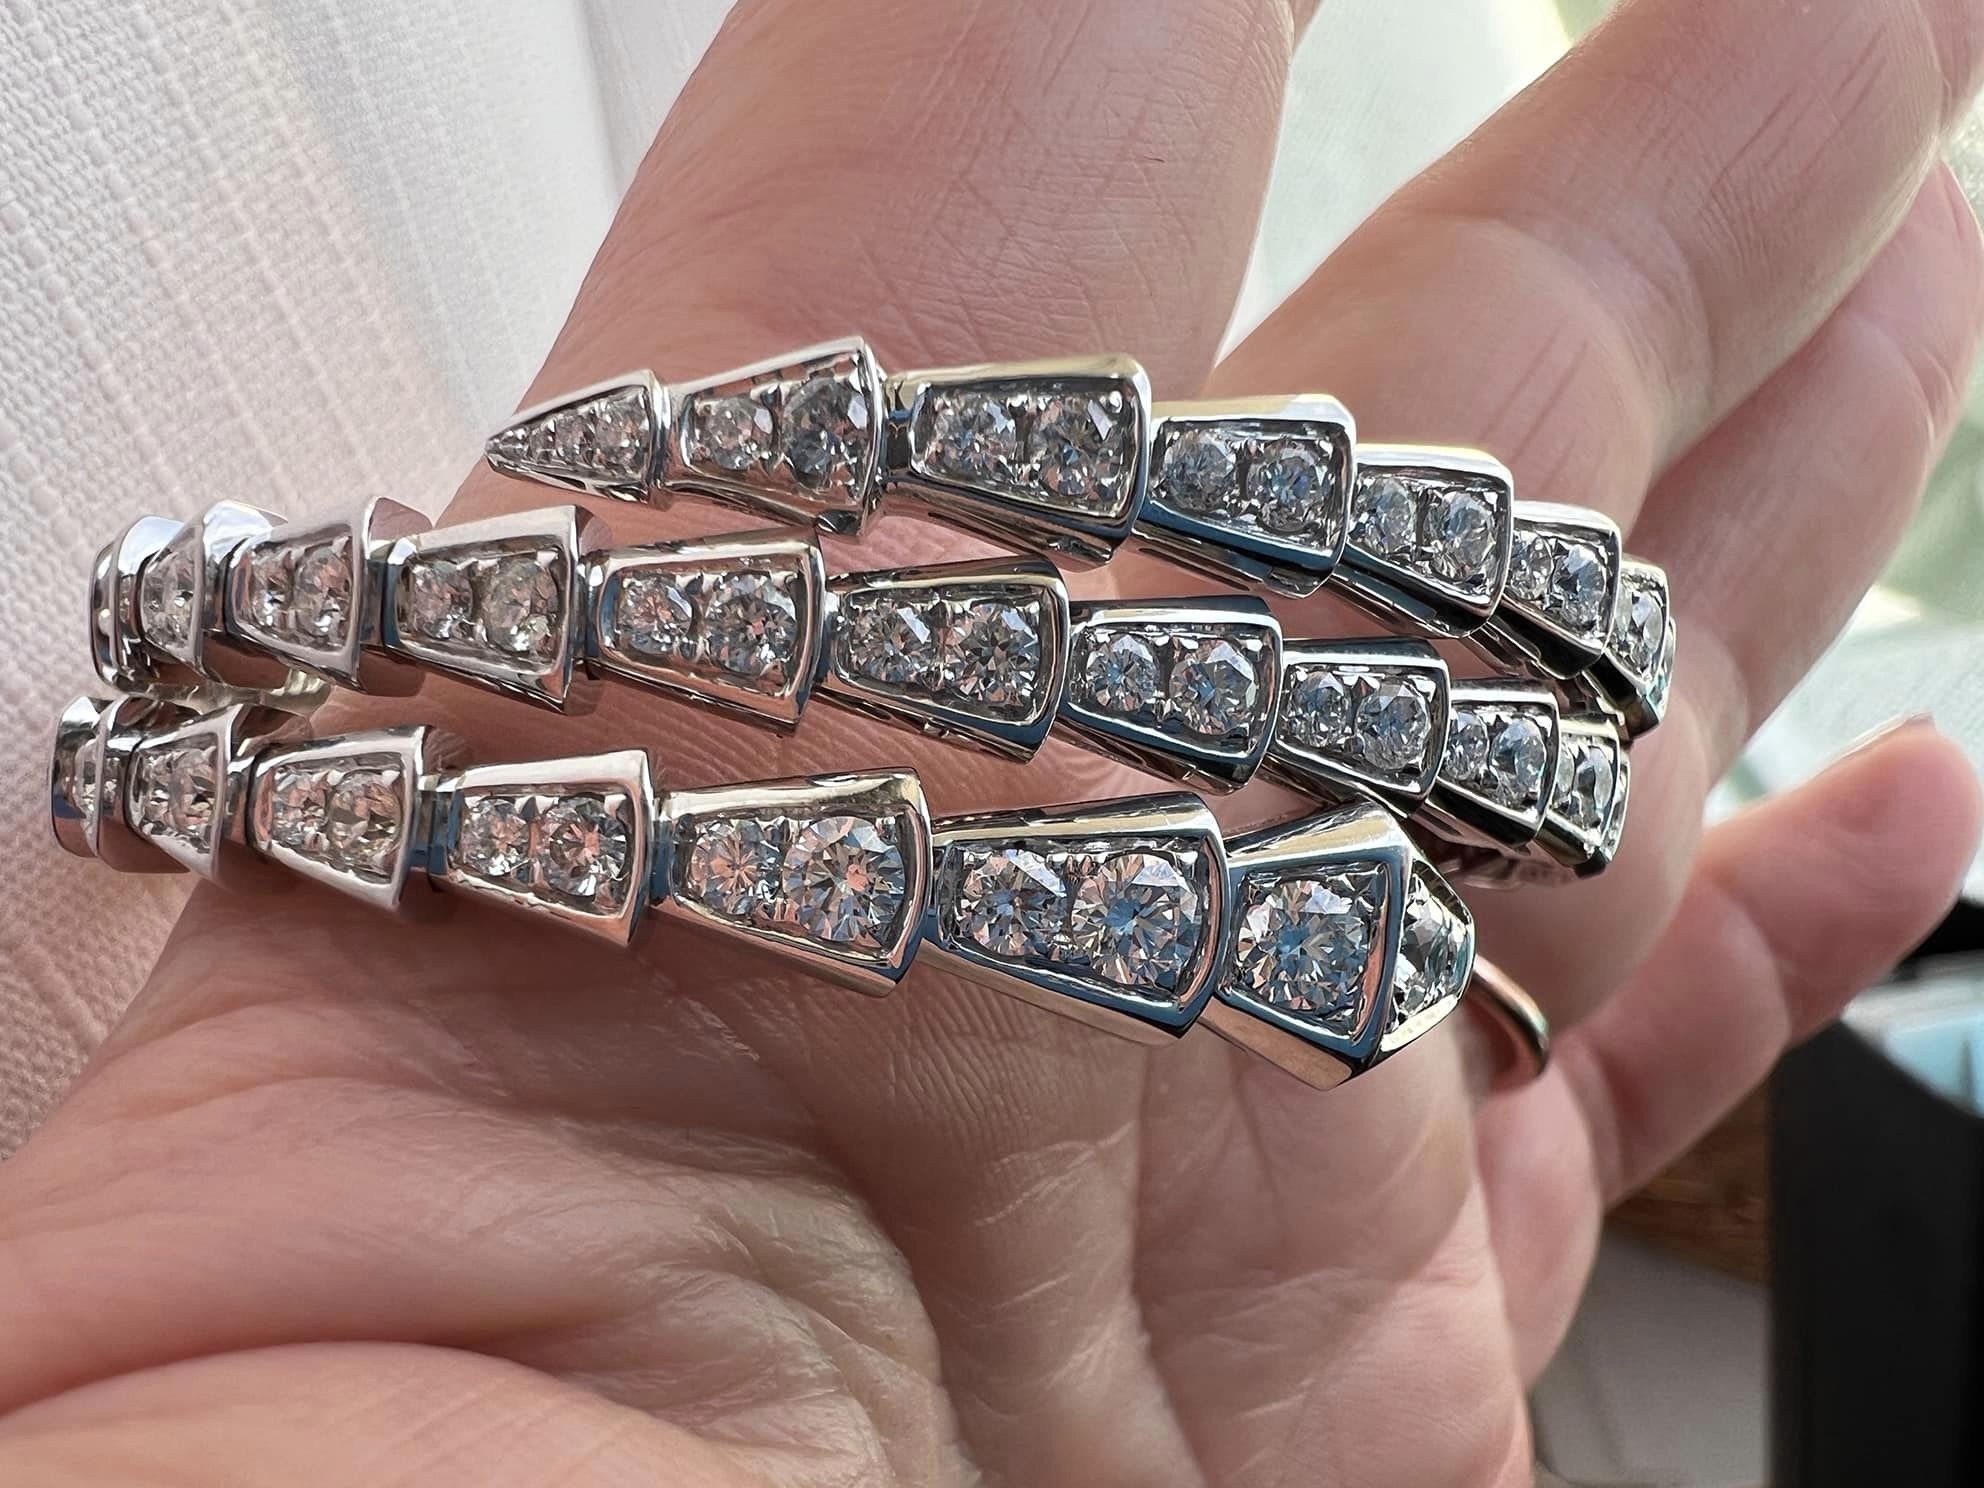 Someone tried to smuggle diamond-encrusted jewelry to Ukraine under the guise of steel beads for $60. Photo